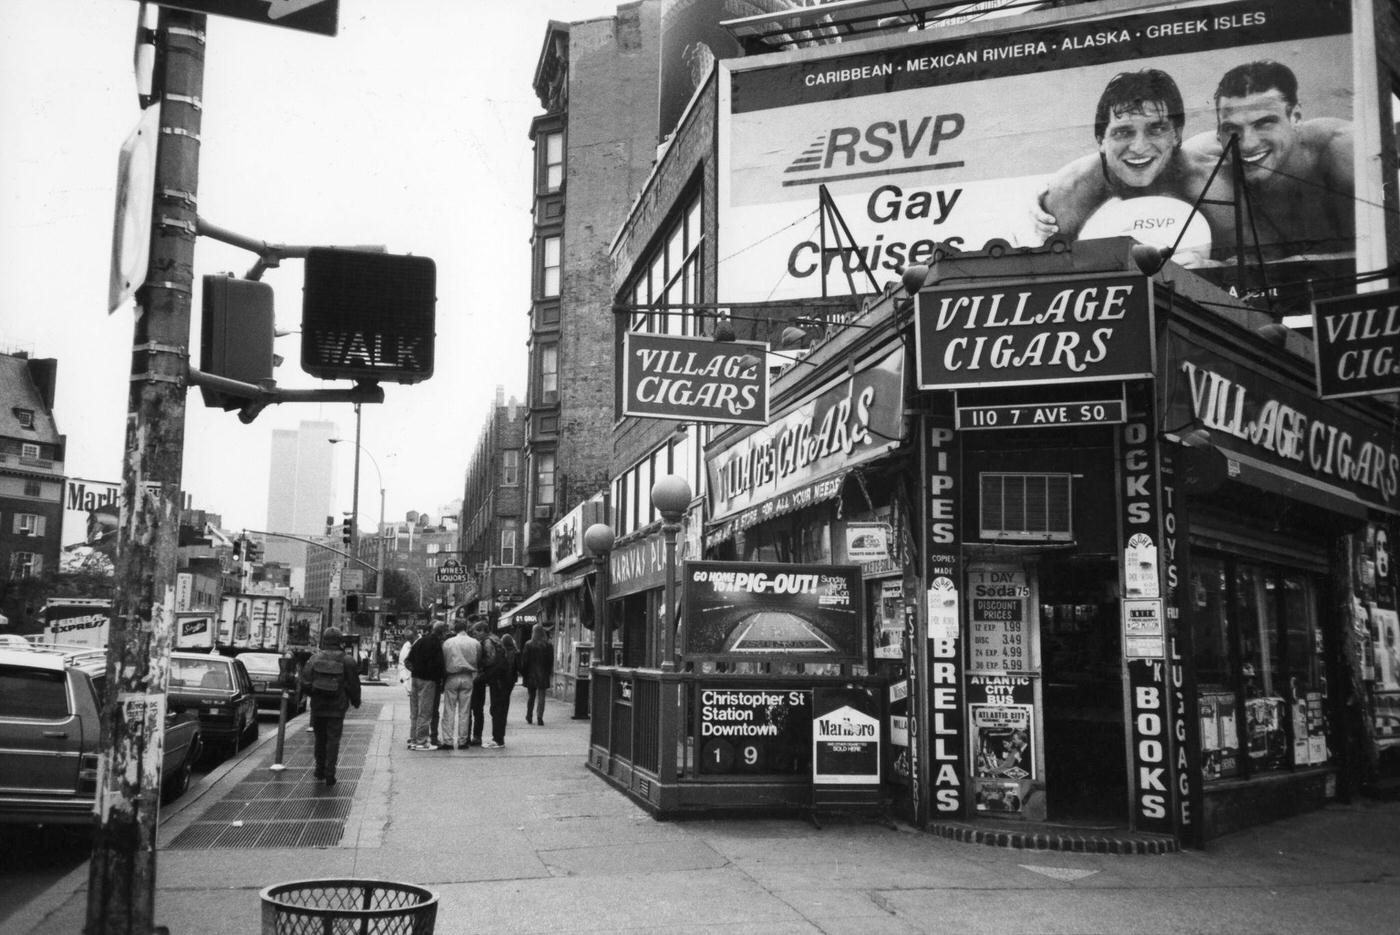 View Of 7Th Avenue With Christopher Street Subway Station And Village Cigars, Manhattan, 1991.